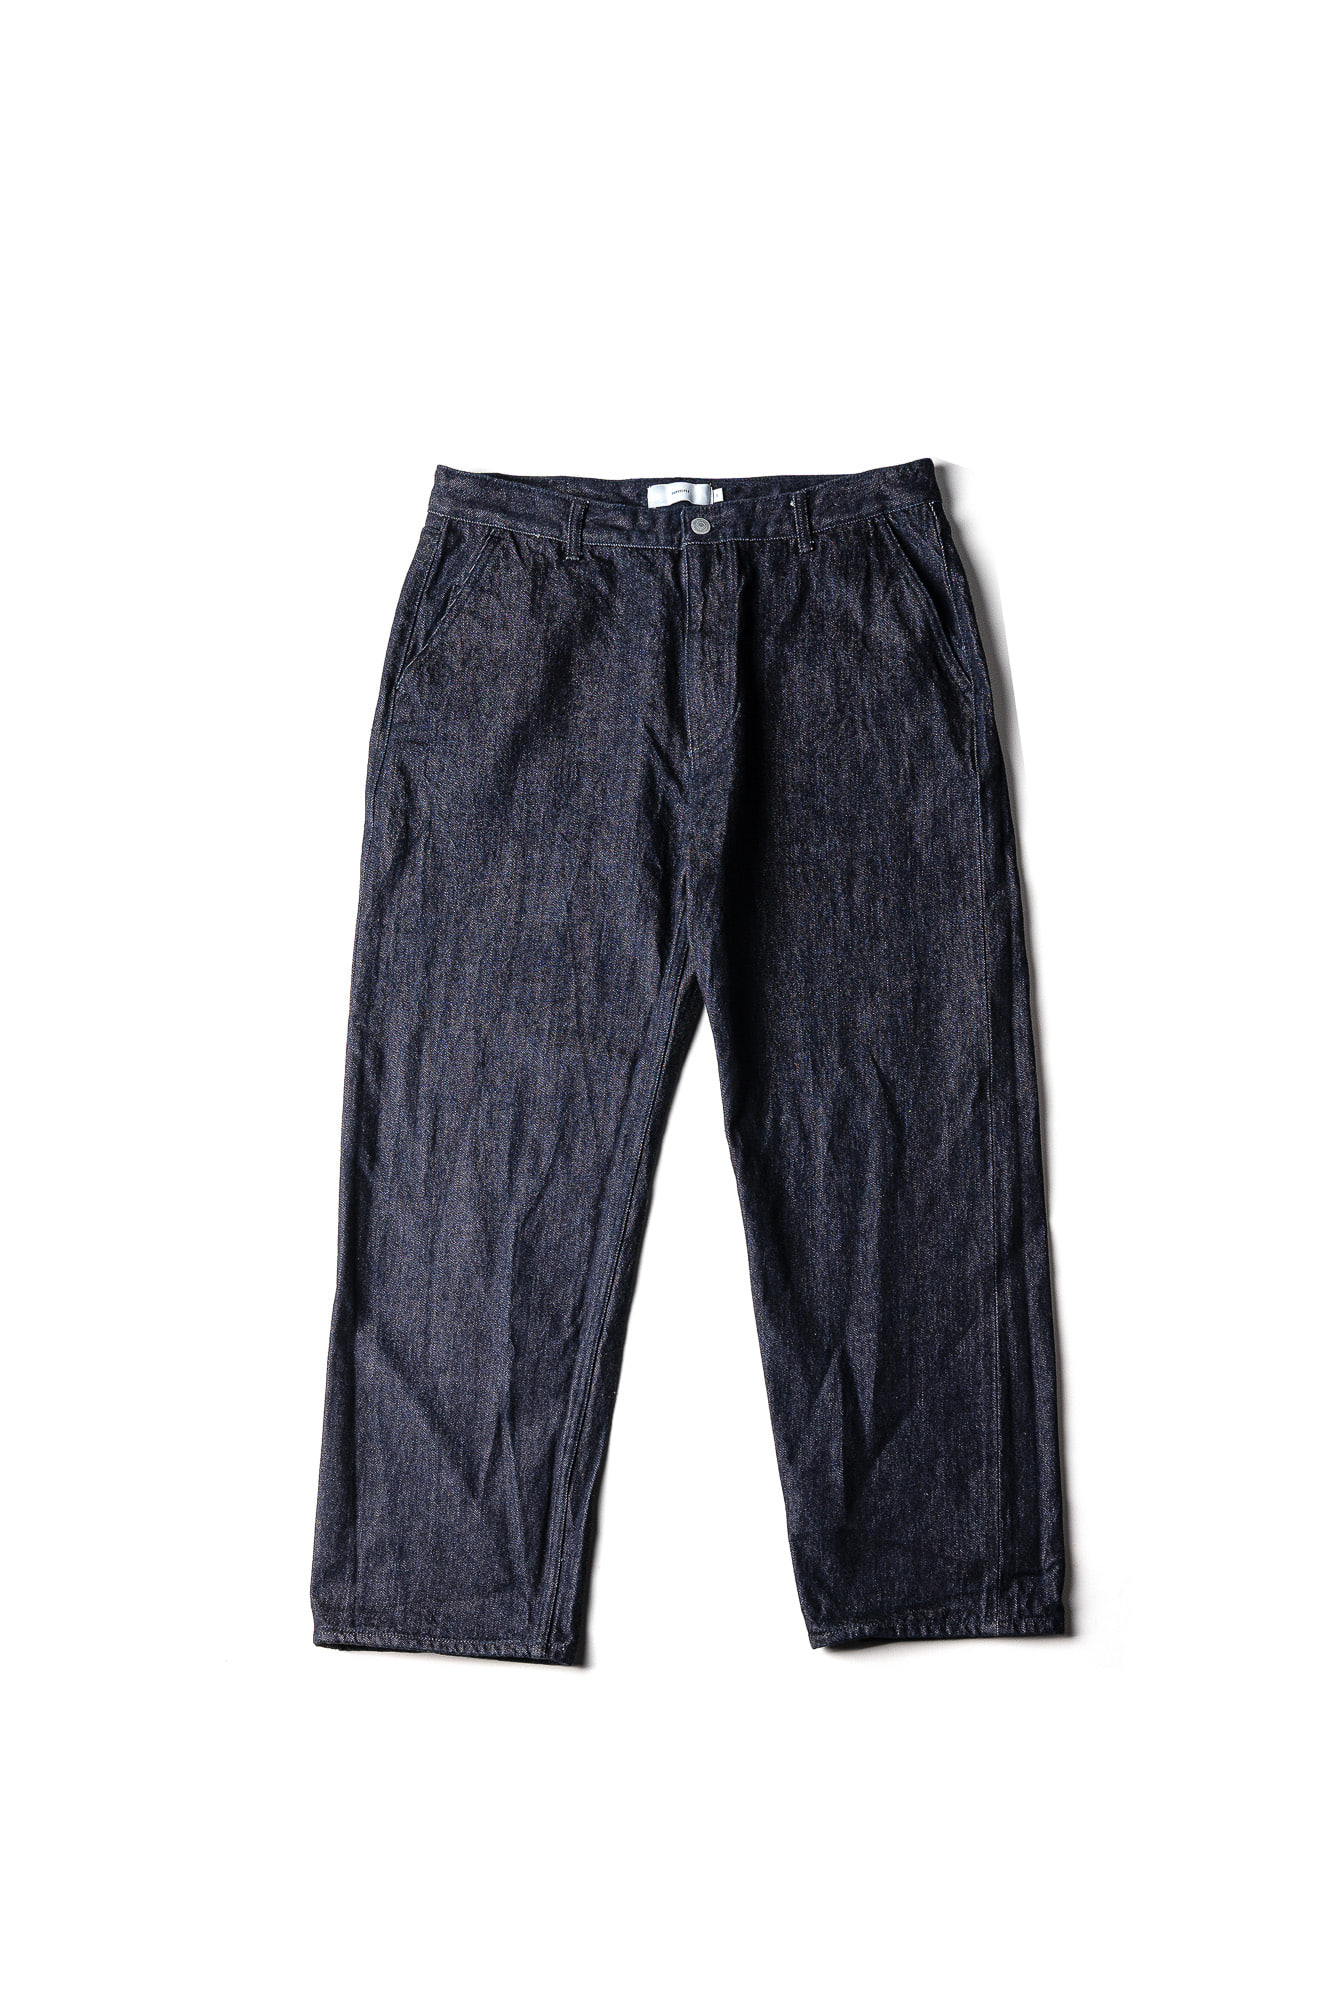 ORGANIC COTTON RELAXED DENIM PANTS (one-wash)